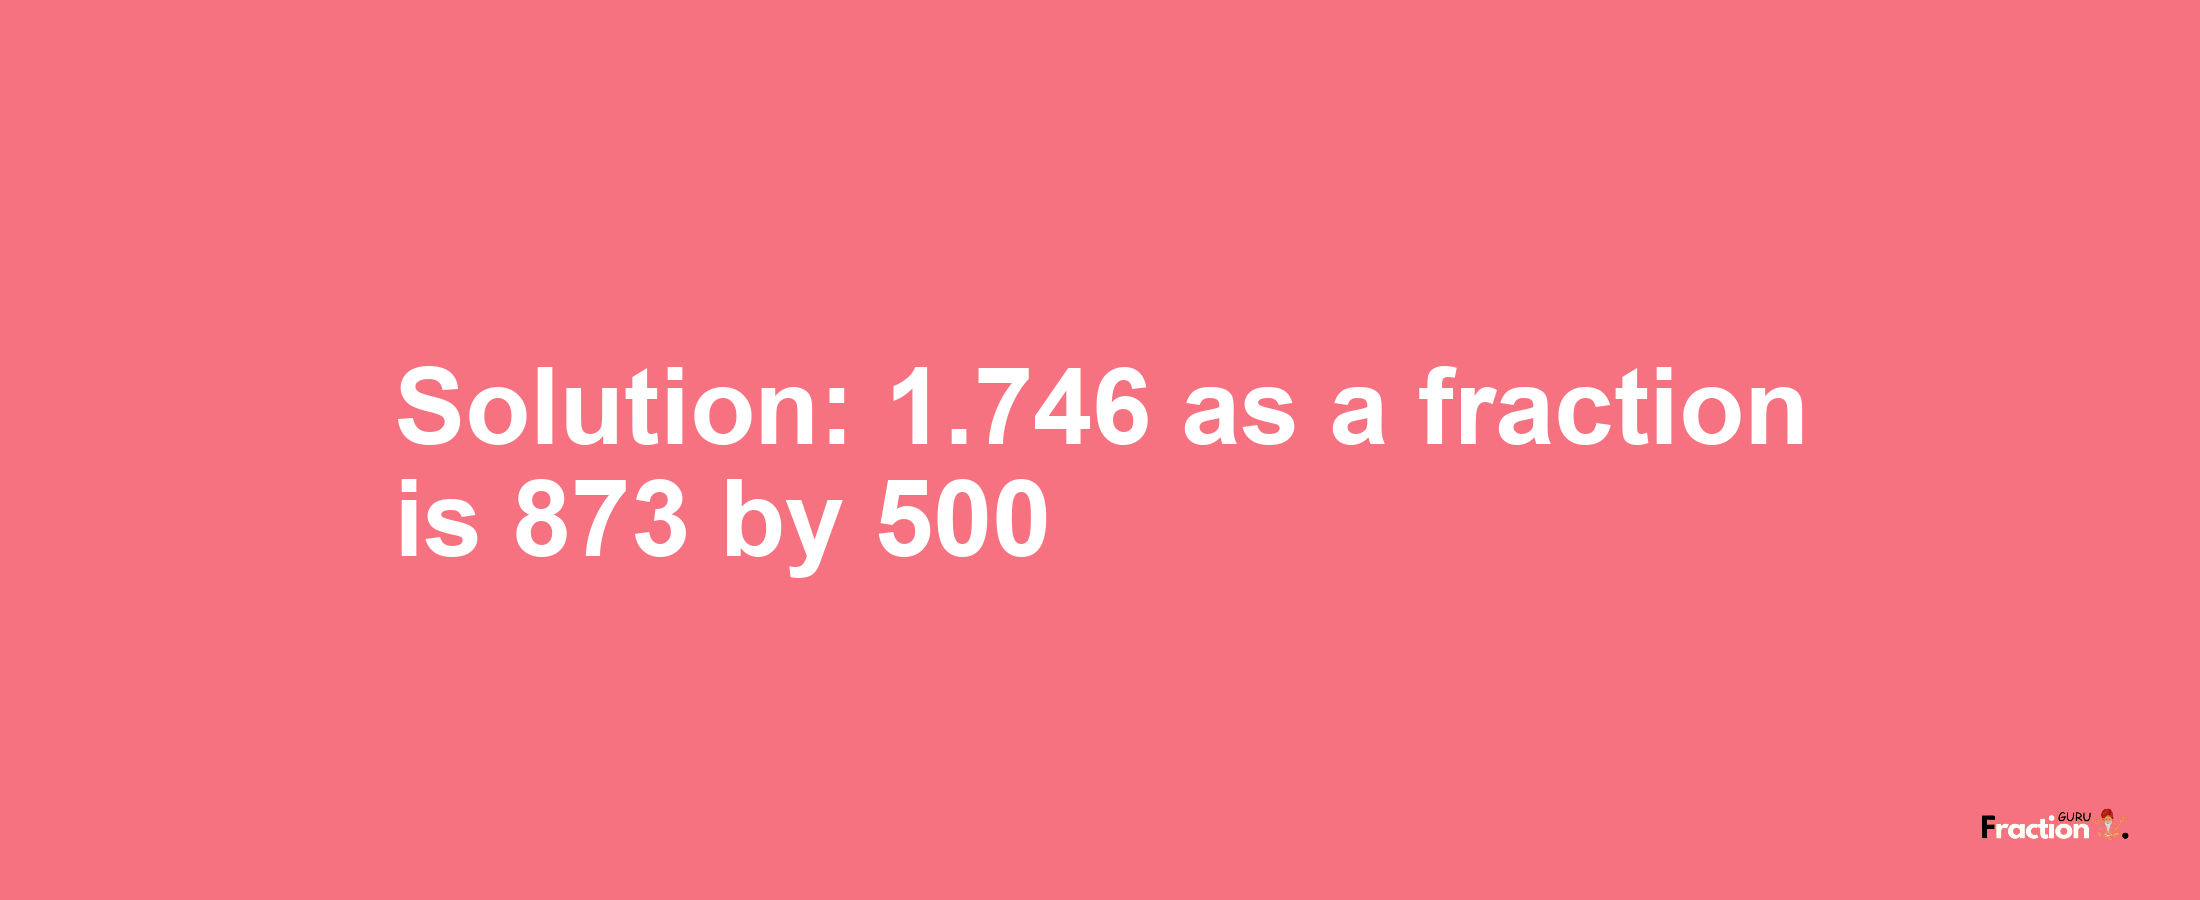 Solution:1.746 as a fraction is 873/500